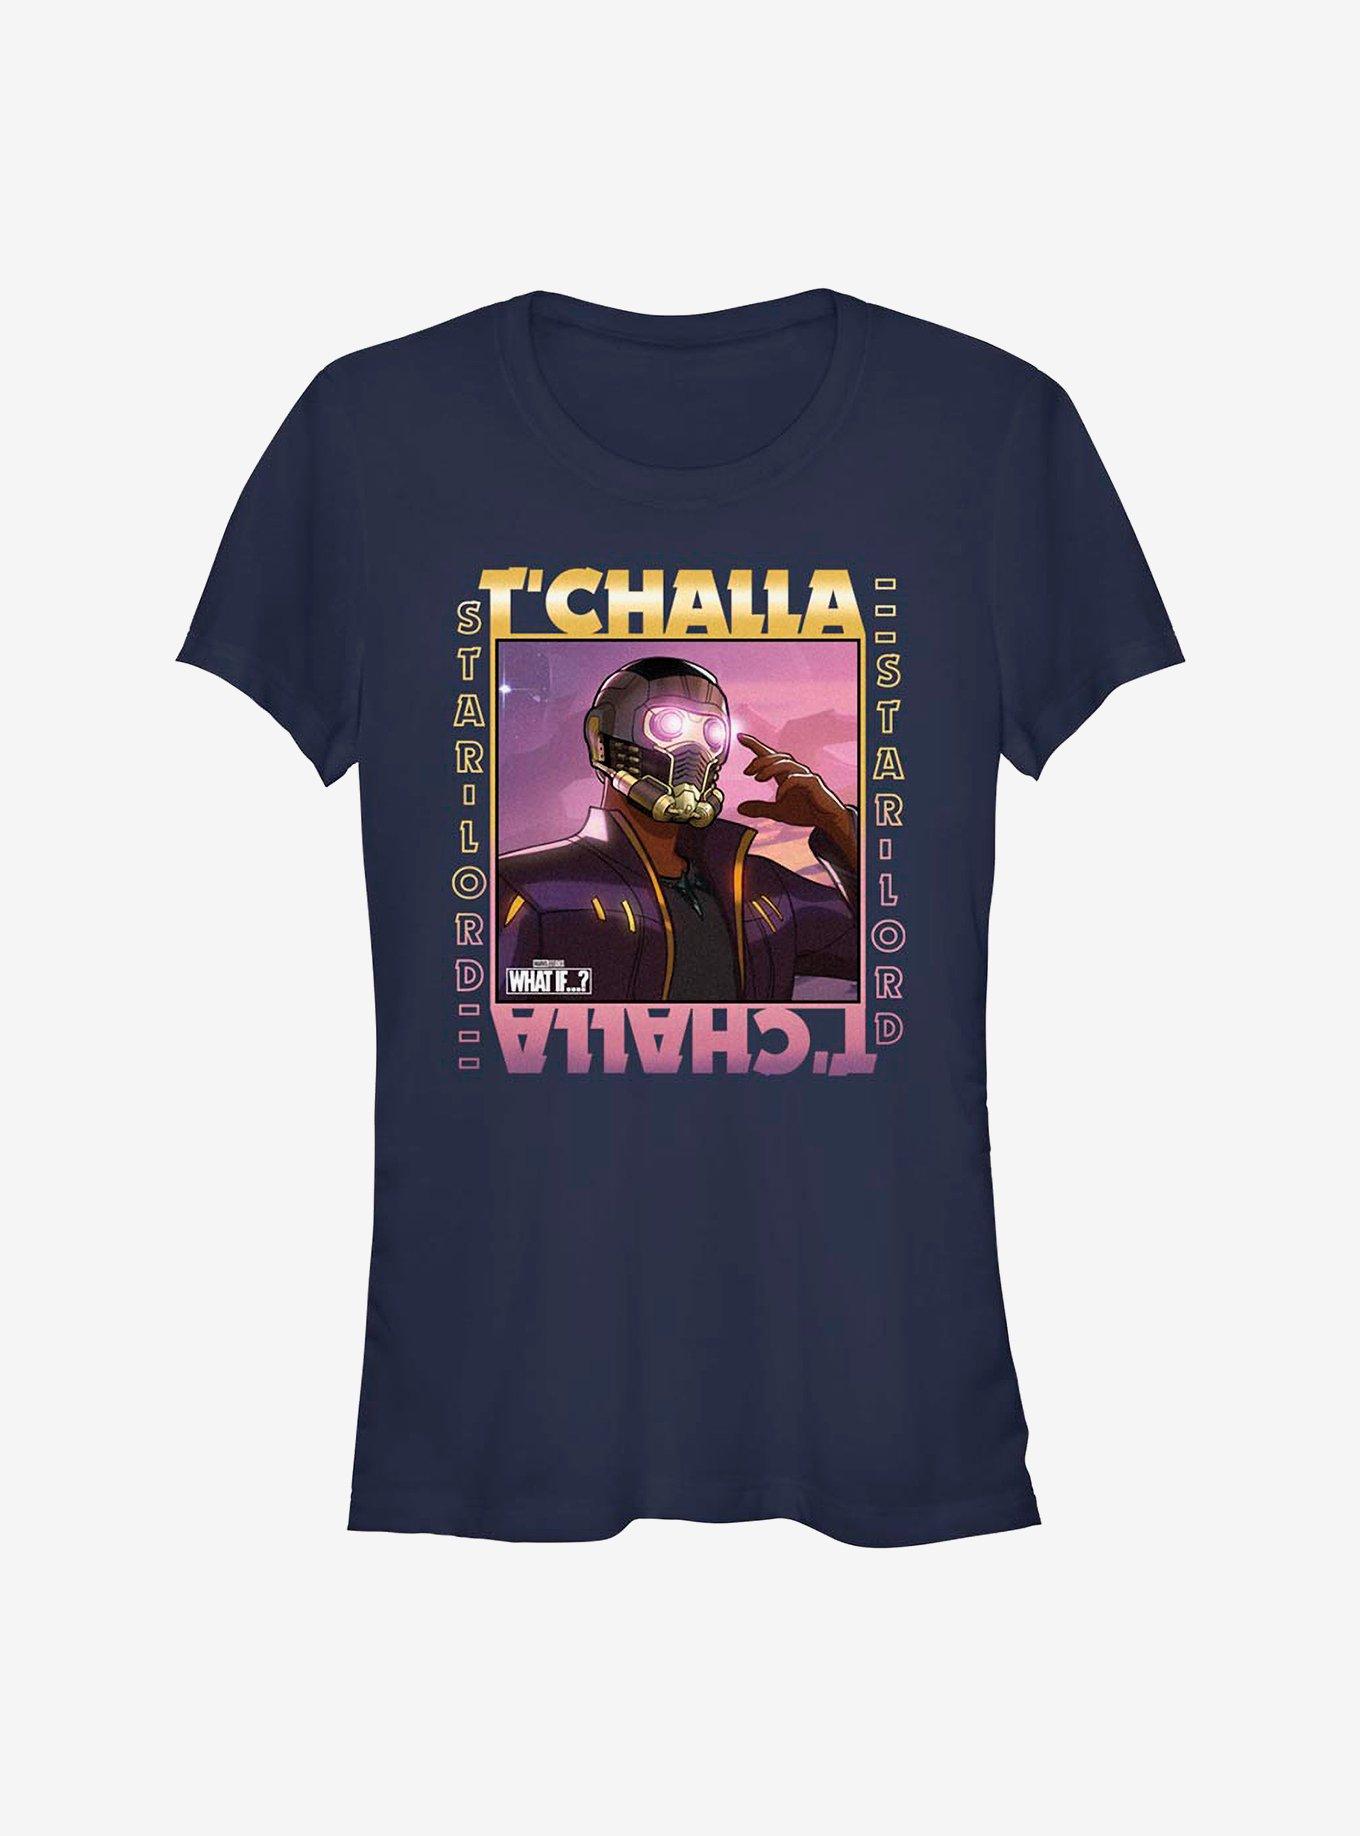 Marvel What If...? T'Challa Was Star-Lord Frame Girls T-Shirt, NAVY, hi-res